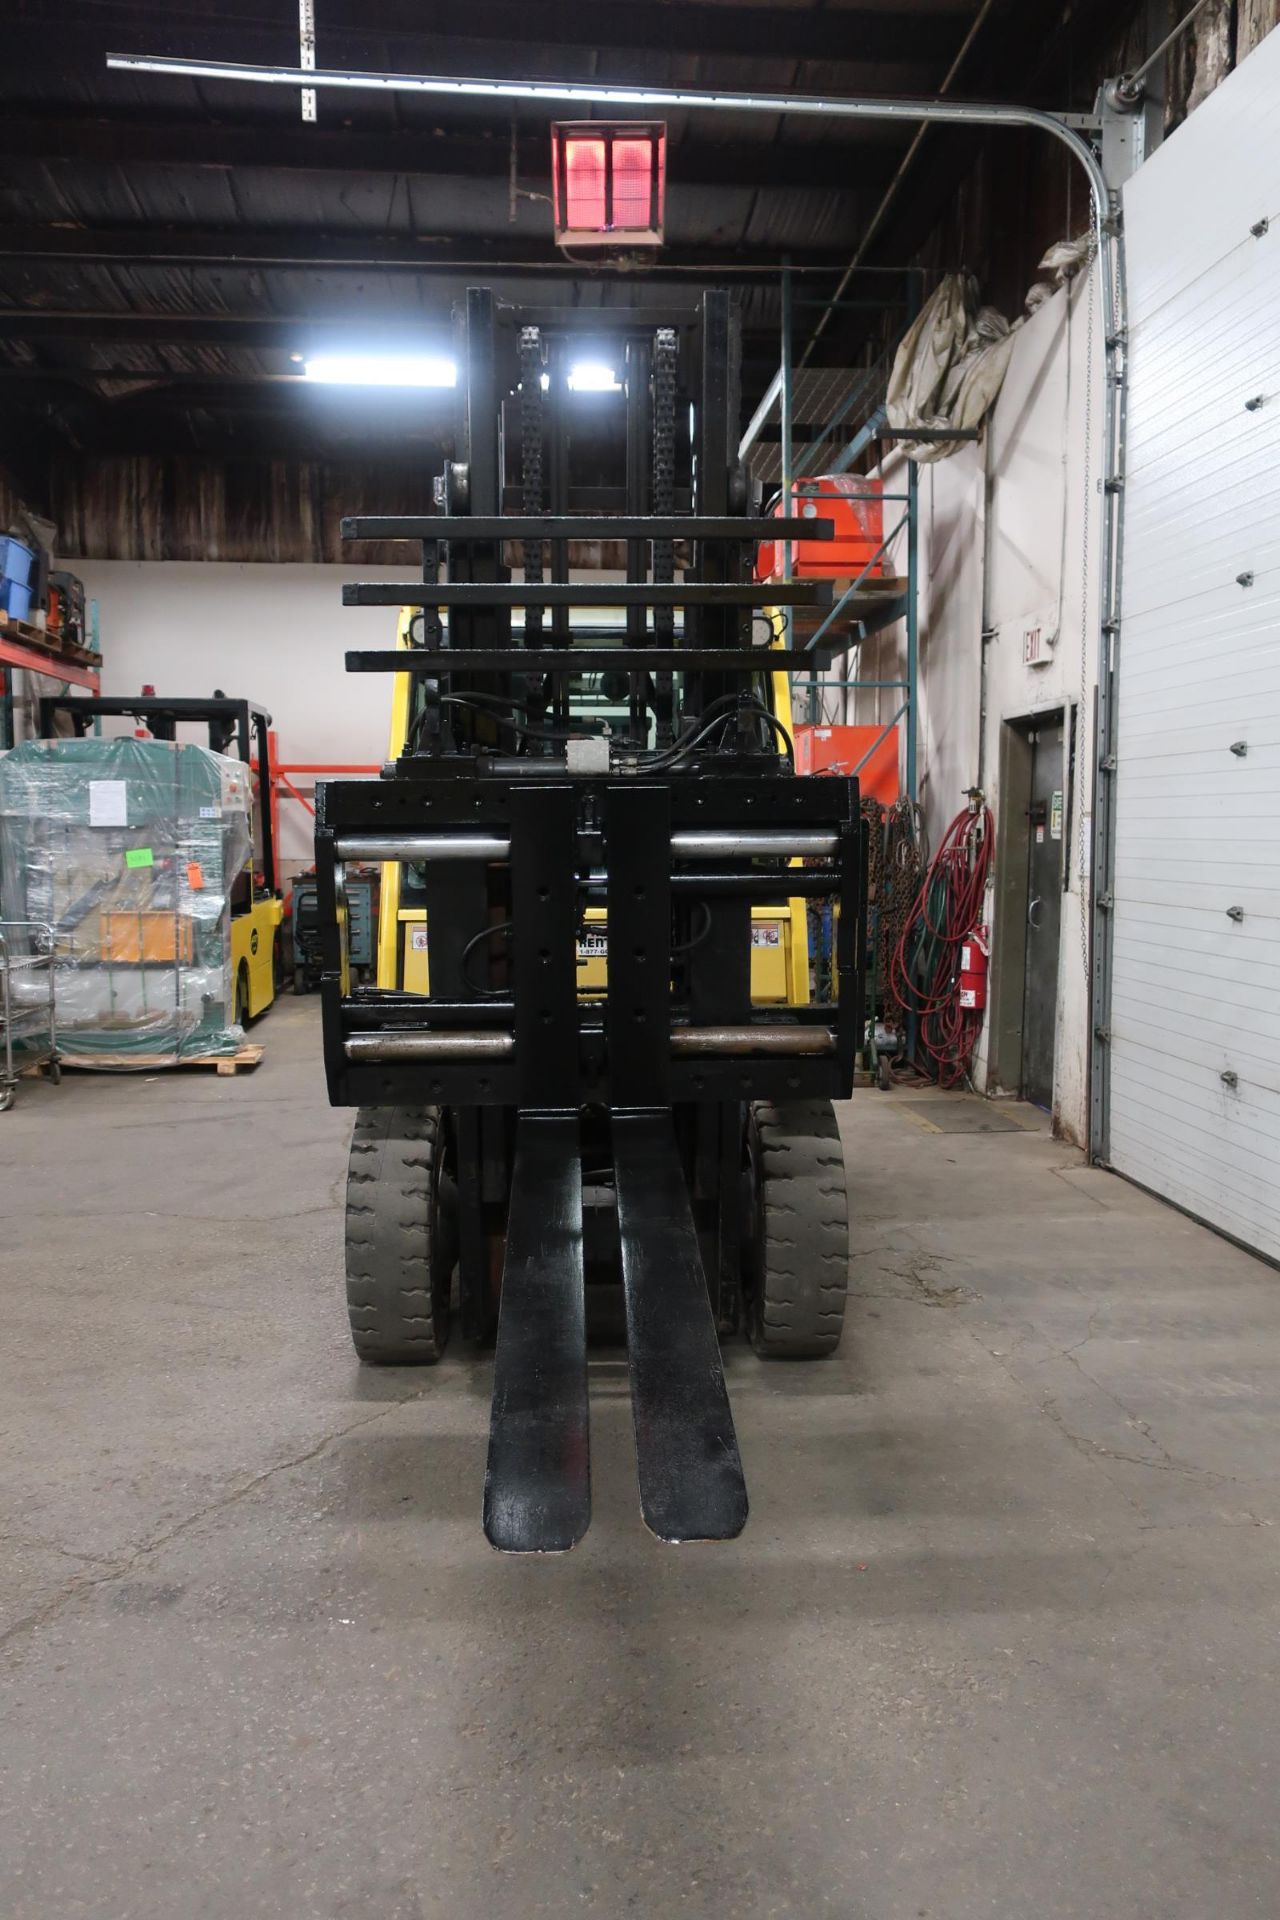 FREE CUSTOMS - 2014 Hyster 10000lbs Capacity OUTDOOR Forklift with 72" forks and fork positioners - Image 2 of 2